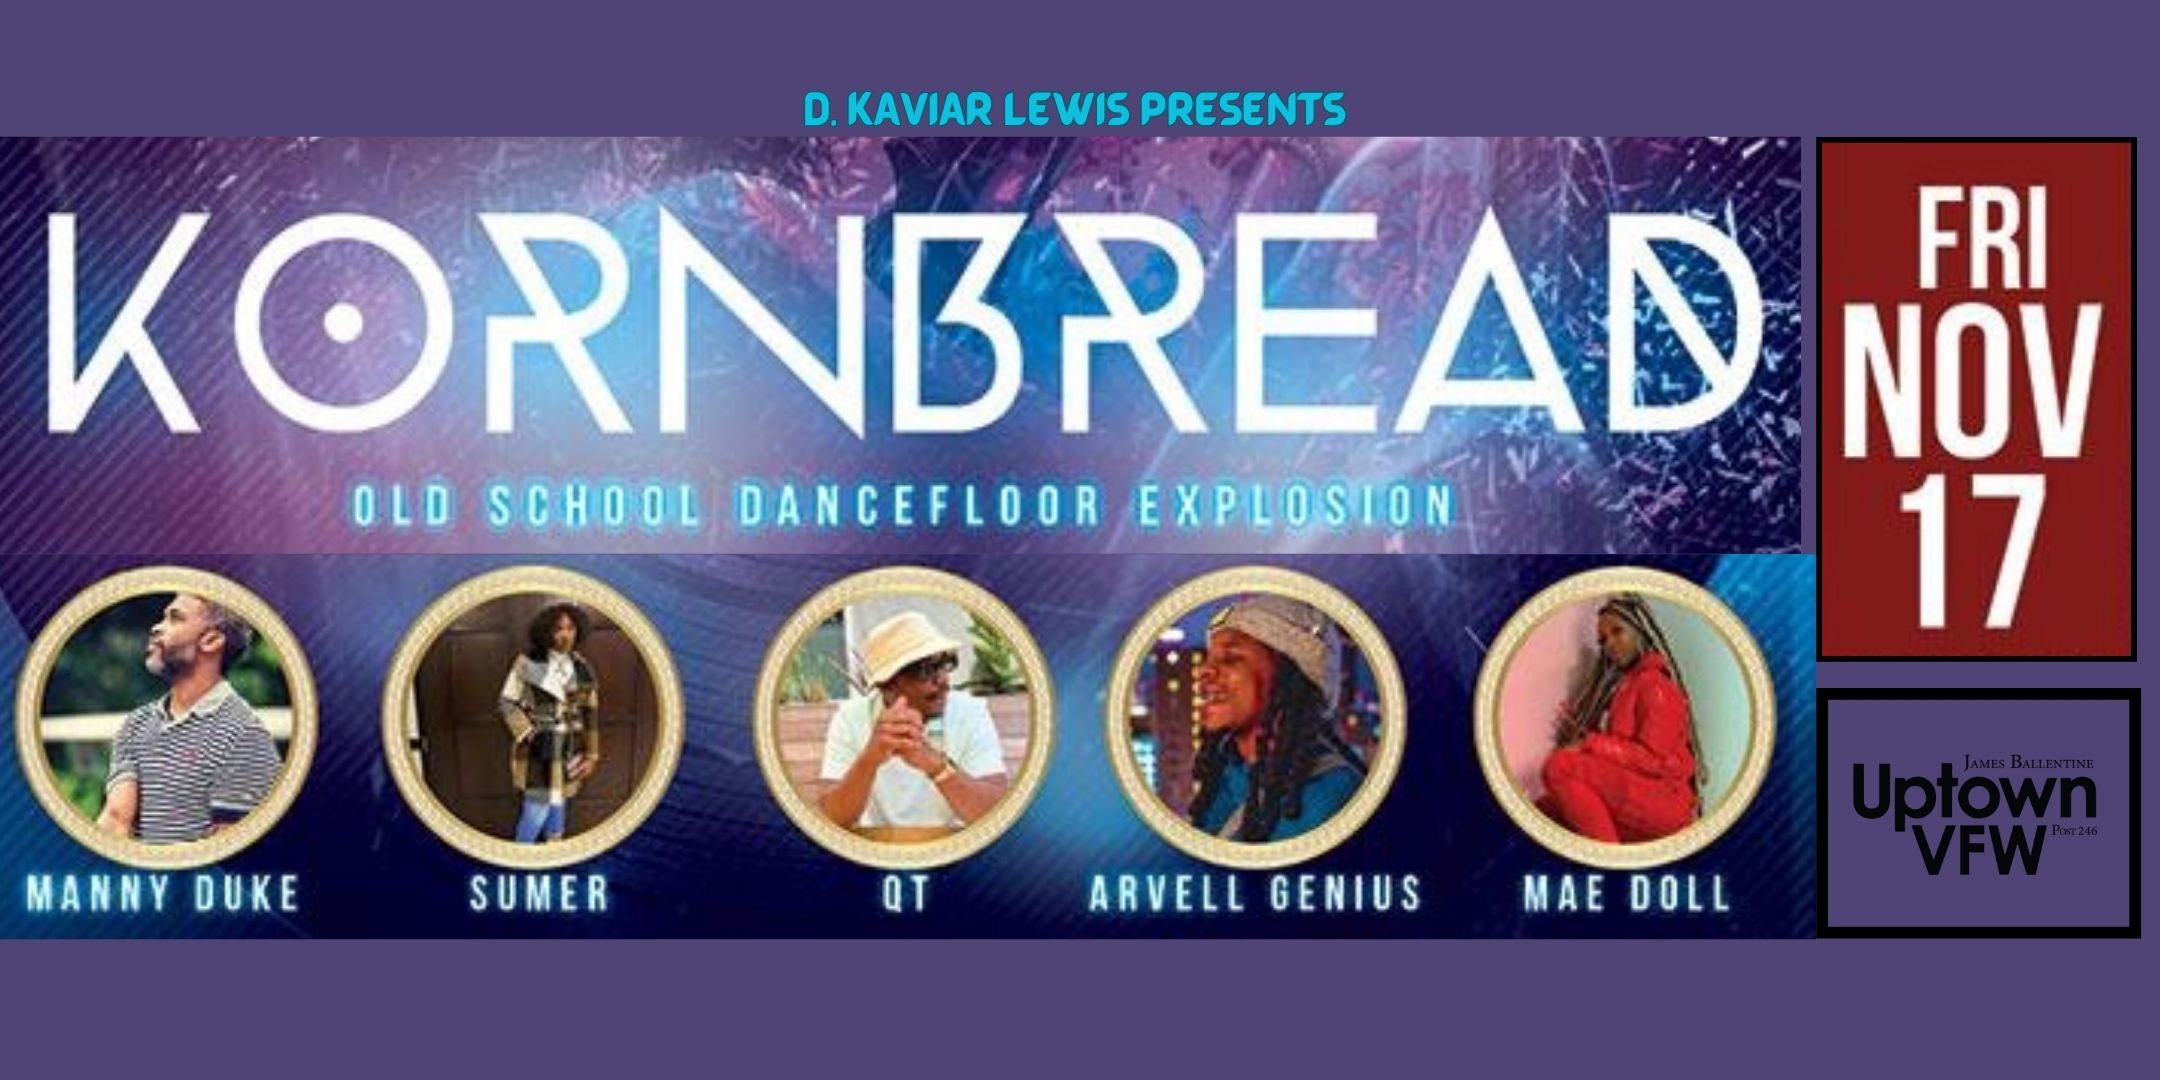 Kaviar D'edrick Lewis Presents Kornbread with Kaviar An Old School Dancefloor Explosion Performances by Arvell Genius | Mae Doll | QT? | Summer | Manny Duke featuring MC Longshot Vibrations provided by Sole2dotz Hosted by Kaviar Friday, November 17 James Ballentine "Uptown" VFW Post 246 Doors 9:30pm :: Music 9:30pm :: 21+ GA $10 ADV / $15 DOS before 11pm / $20 DOS after 11pm :::Tickets on Sale Now:::